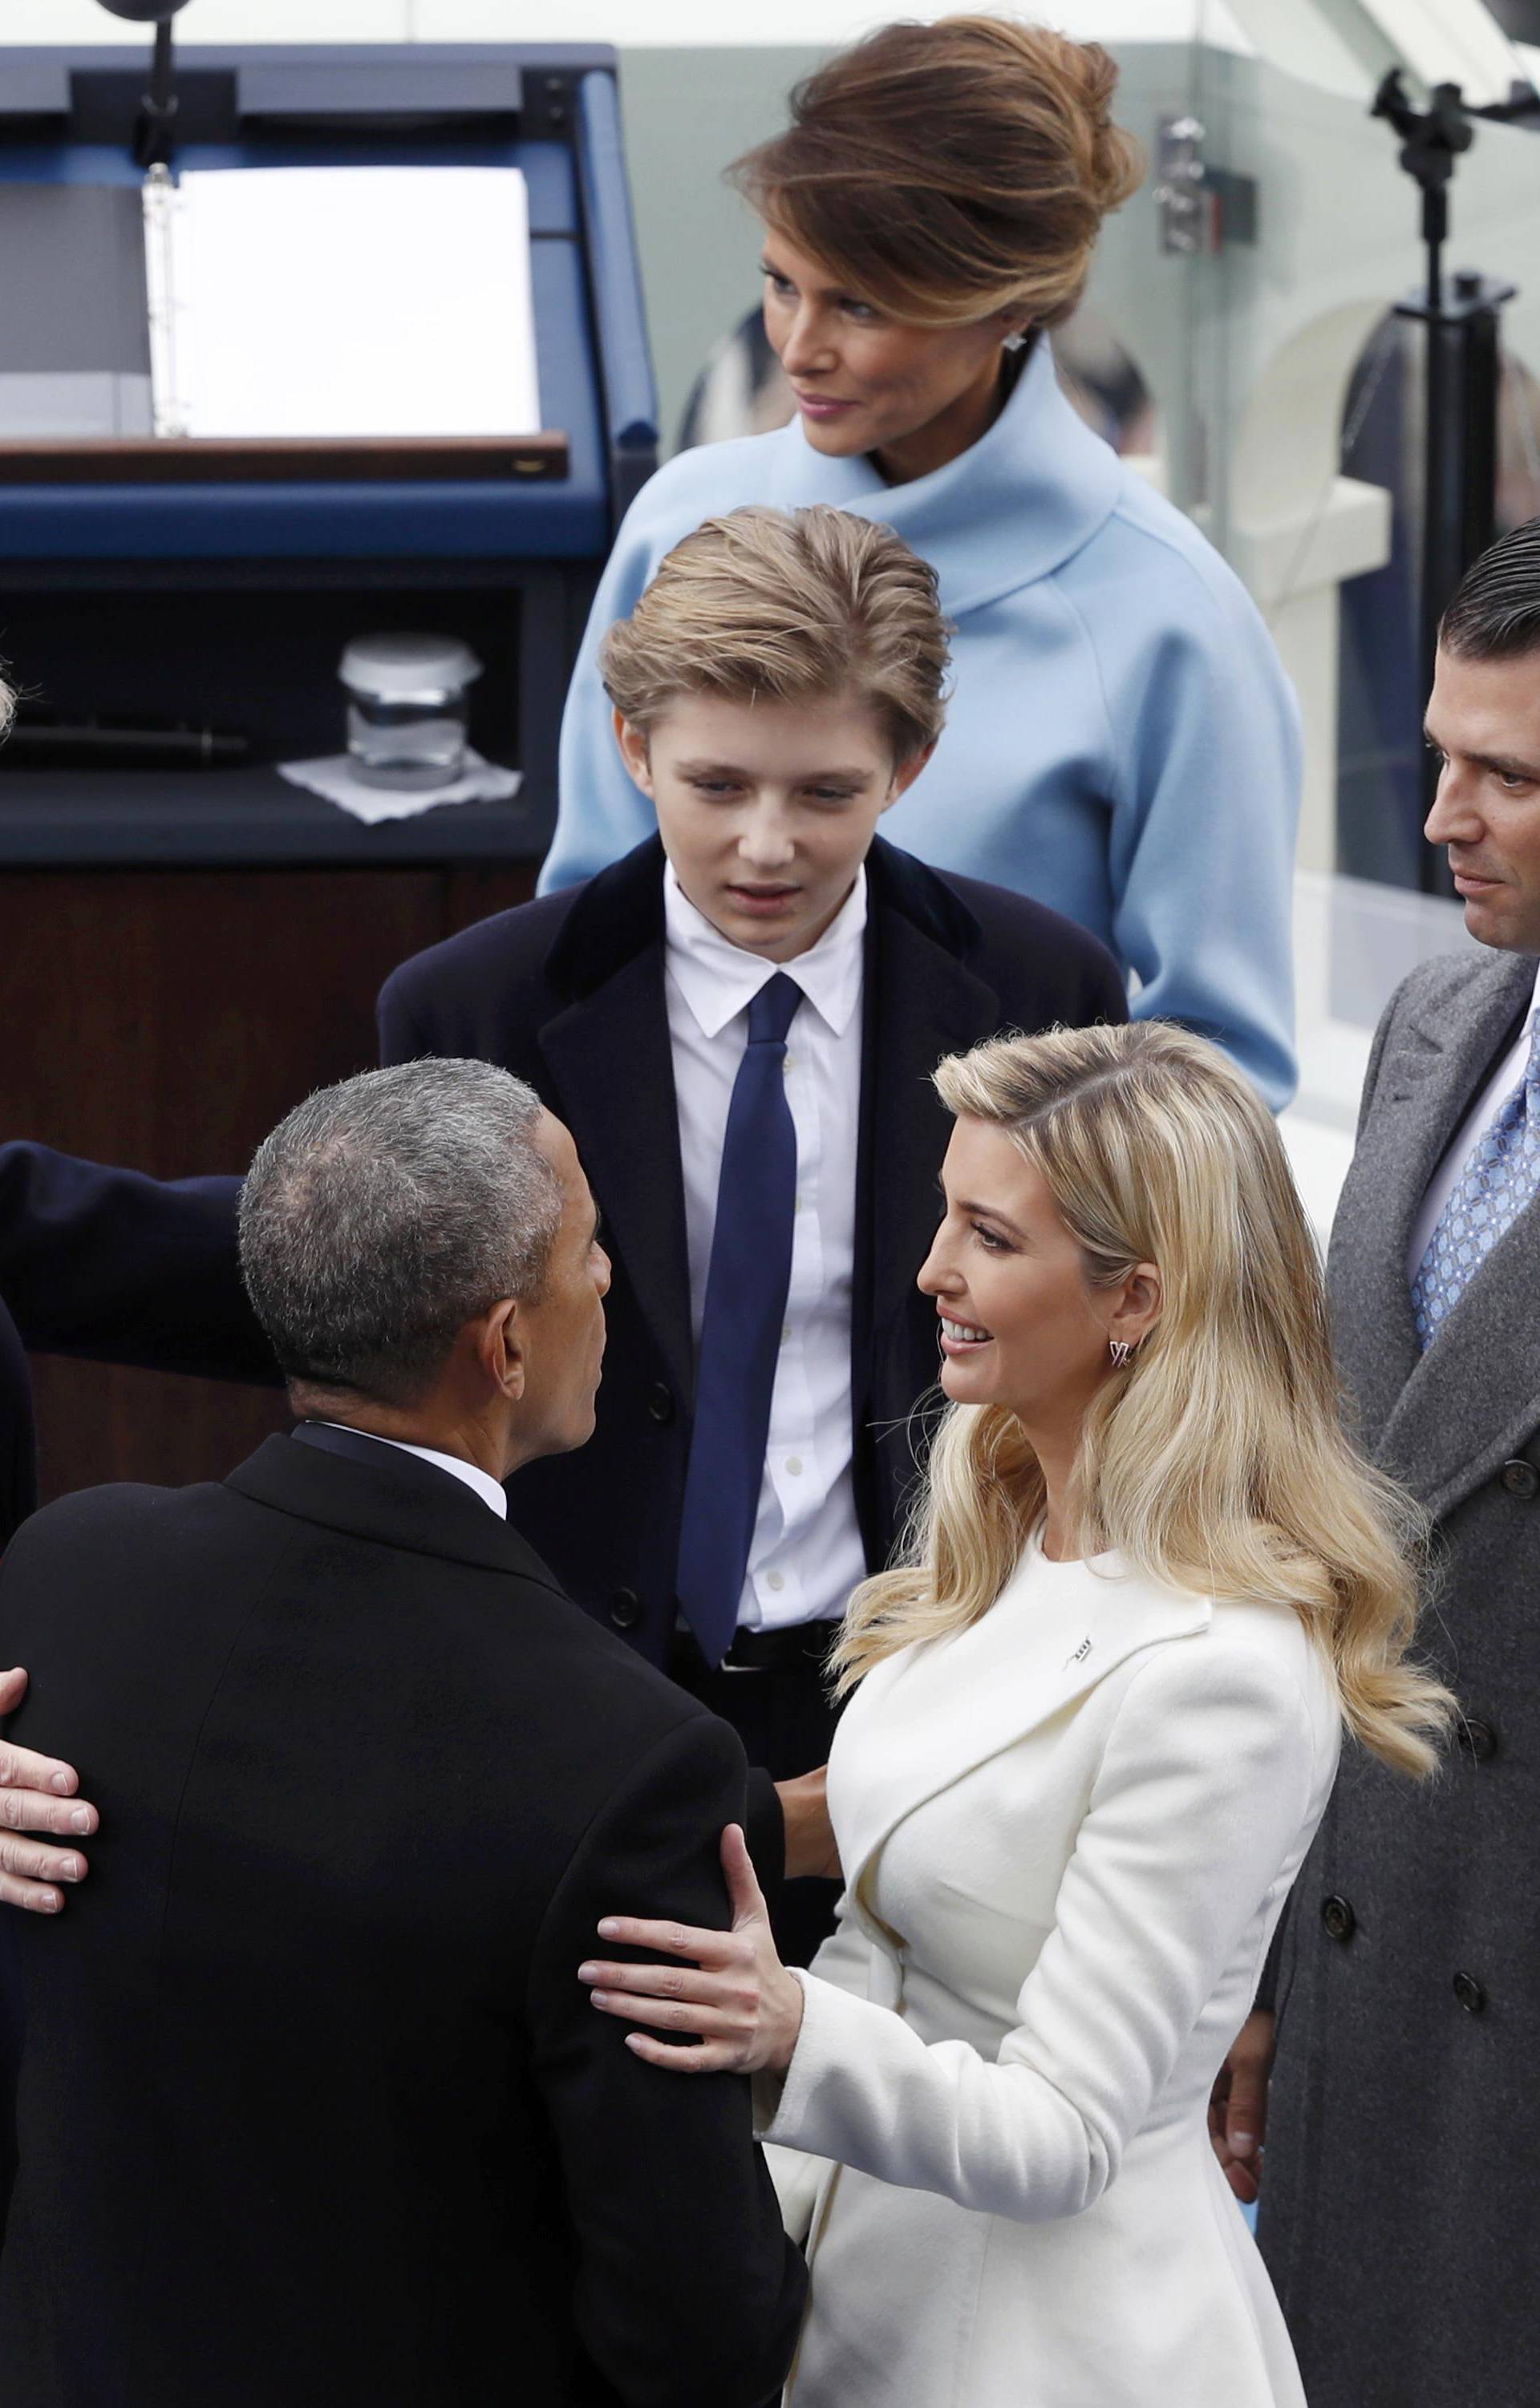 Former U.S. President Barack Obama speaks with Ivanka Trump and other members of the family of U.S. President Donald Trump during inauguration ceremonies in Washington